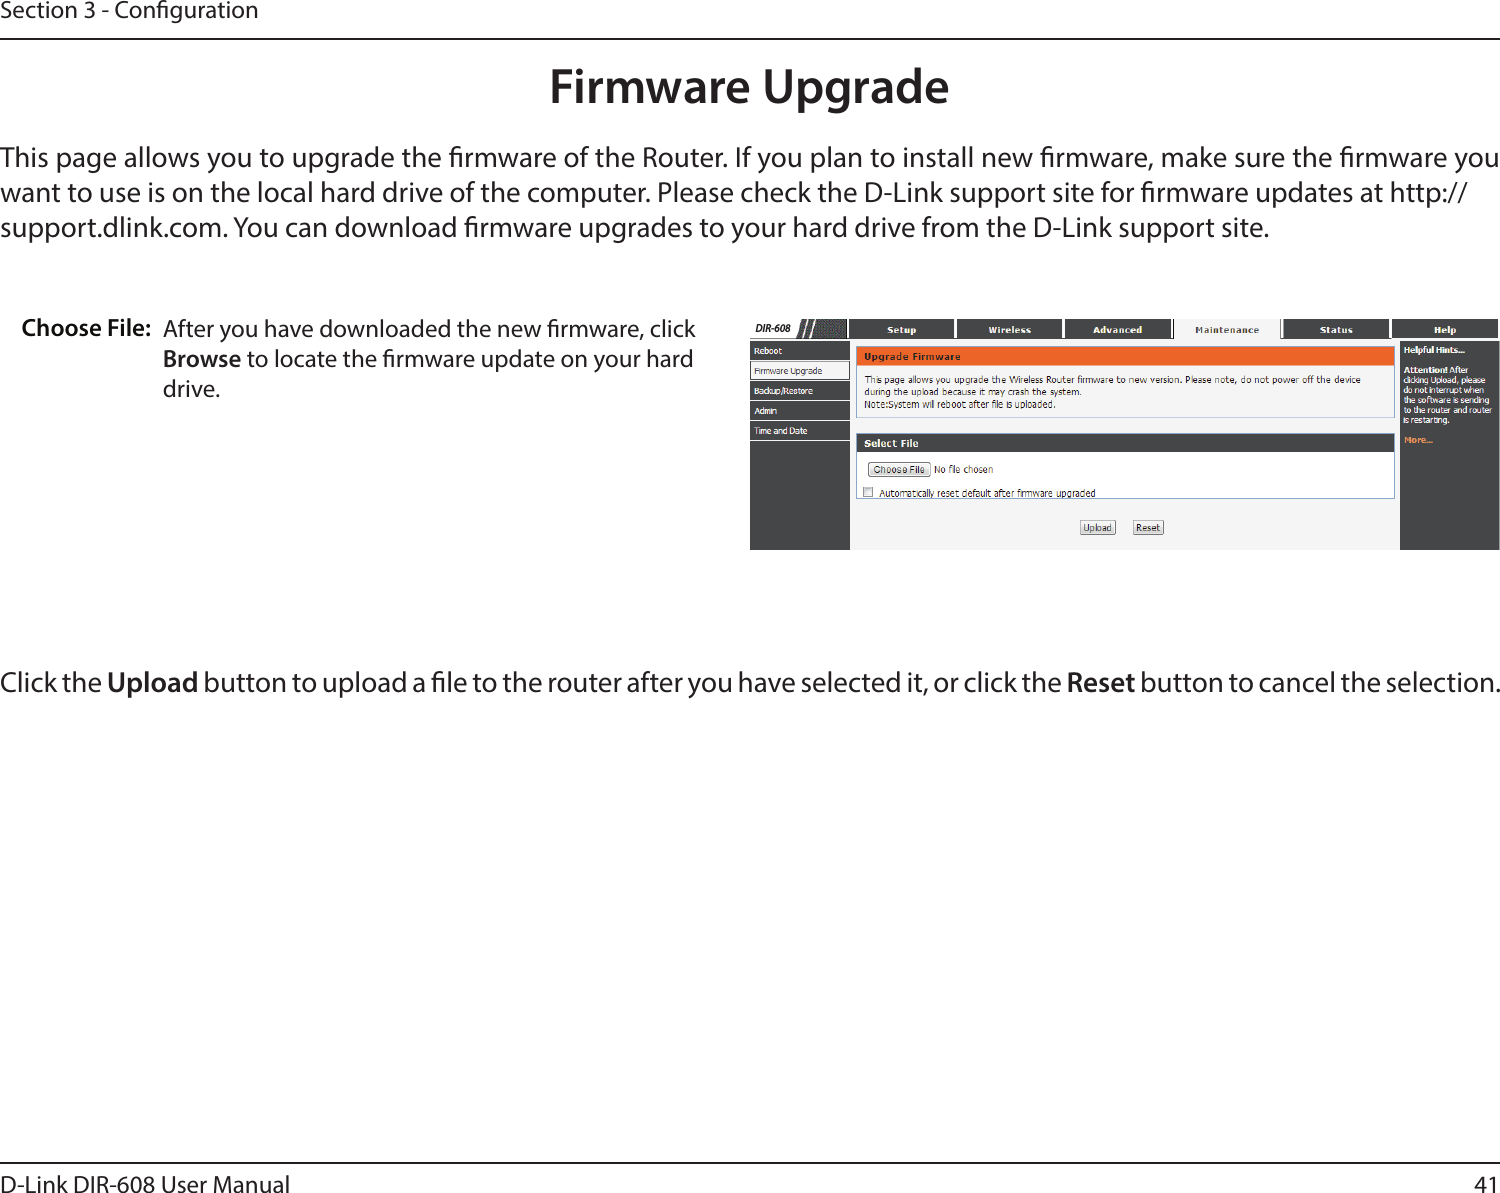 41D-Link DIR-608 User ManualSection 3 - CongurationFirmware UpgradeThis page allows you to upgrade the rmware of the Router. If you plan to install new rmware, make sure the rmware you want to use is on the local hard drive of the computer. Please check the D-Link support site for rmware updates at http://support.dlink.com. You can download rmware upgrades to your hard drive from the D-Link support site.After you have downloaded the new rmware, clickBrowse to locate the rmware update on your harddrive.Choose File:Click the Upload button to upload a le to the router after you have selected it, or click the Reset button to cancel the selection.DIR-608